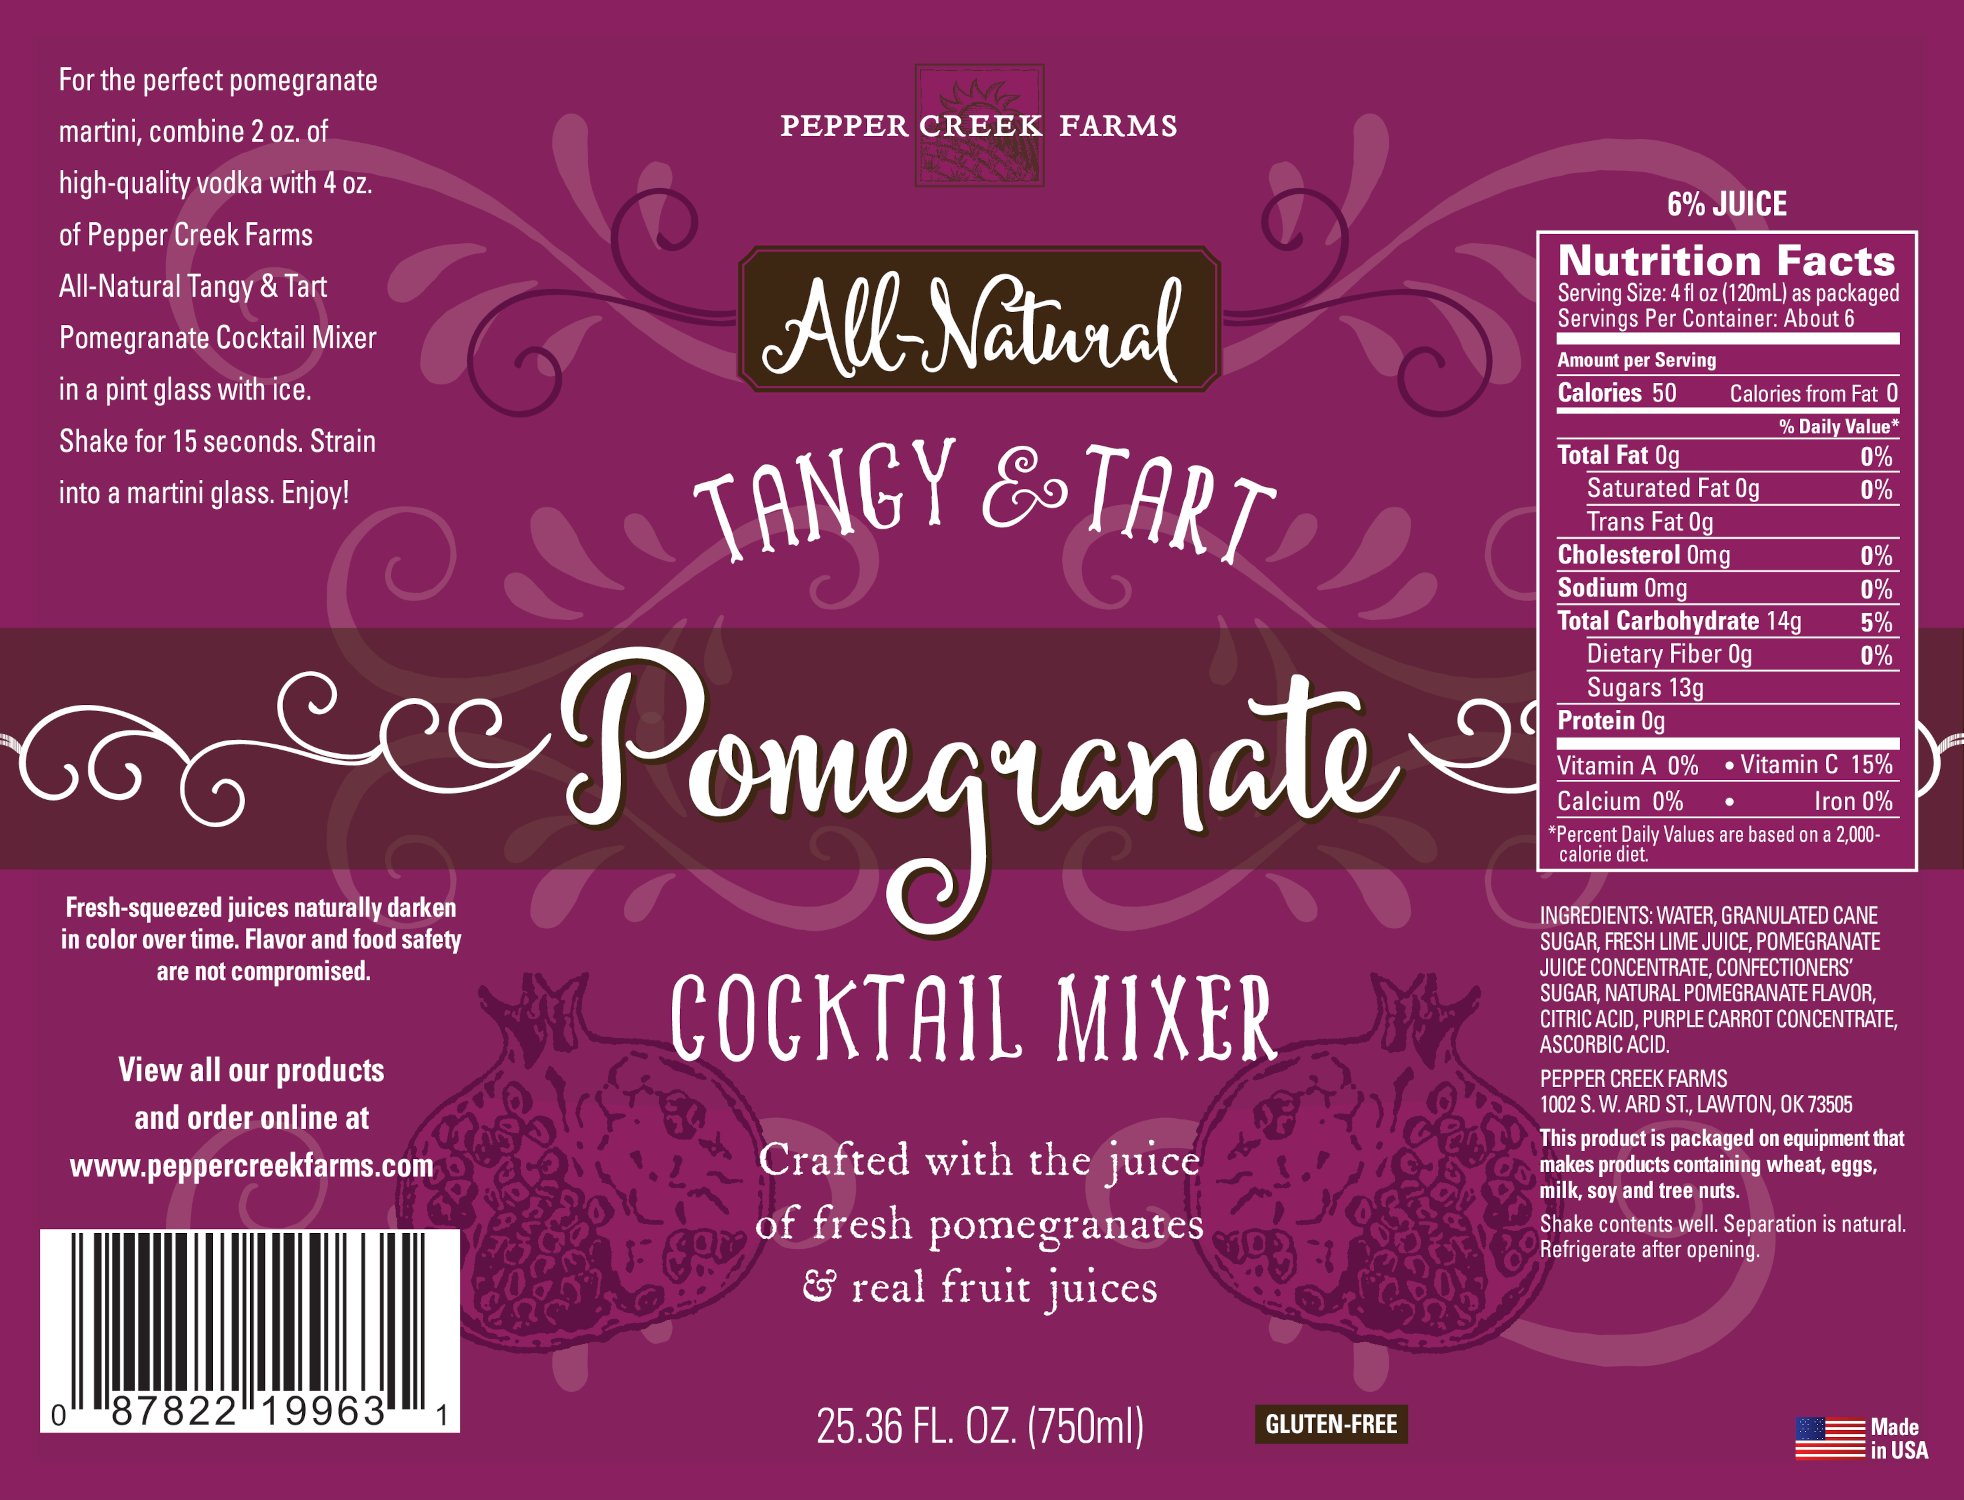 Pcf Drink Mixers Pomegranate Copy